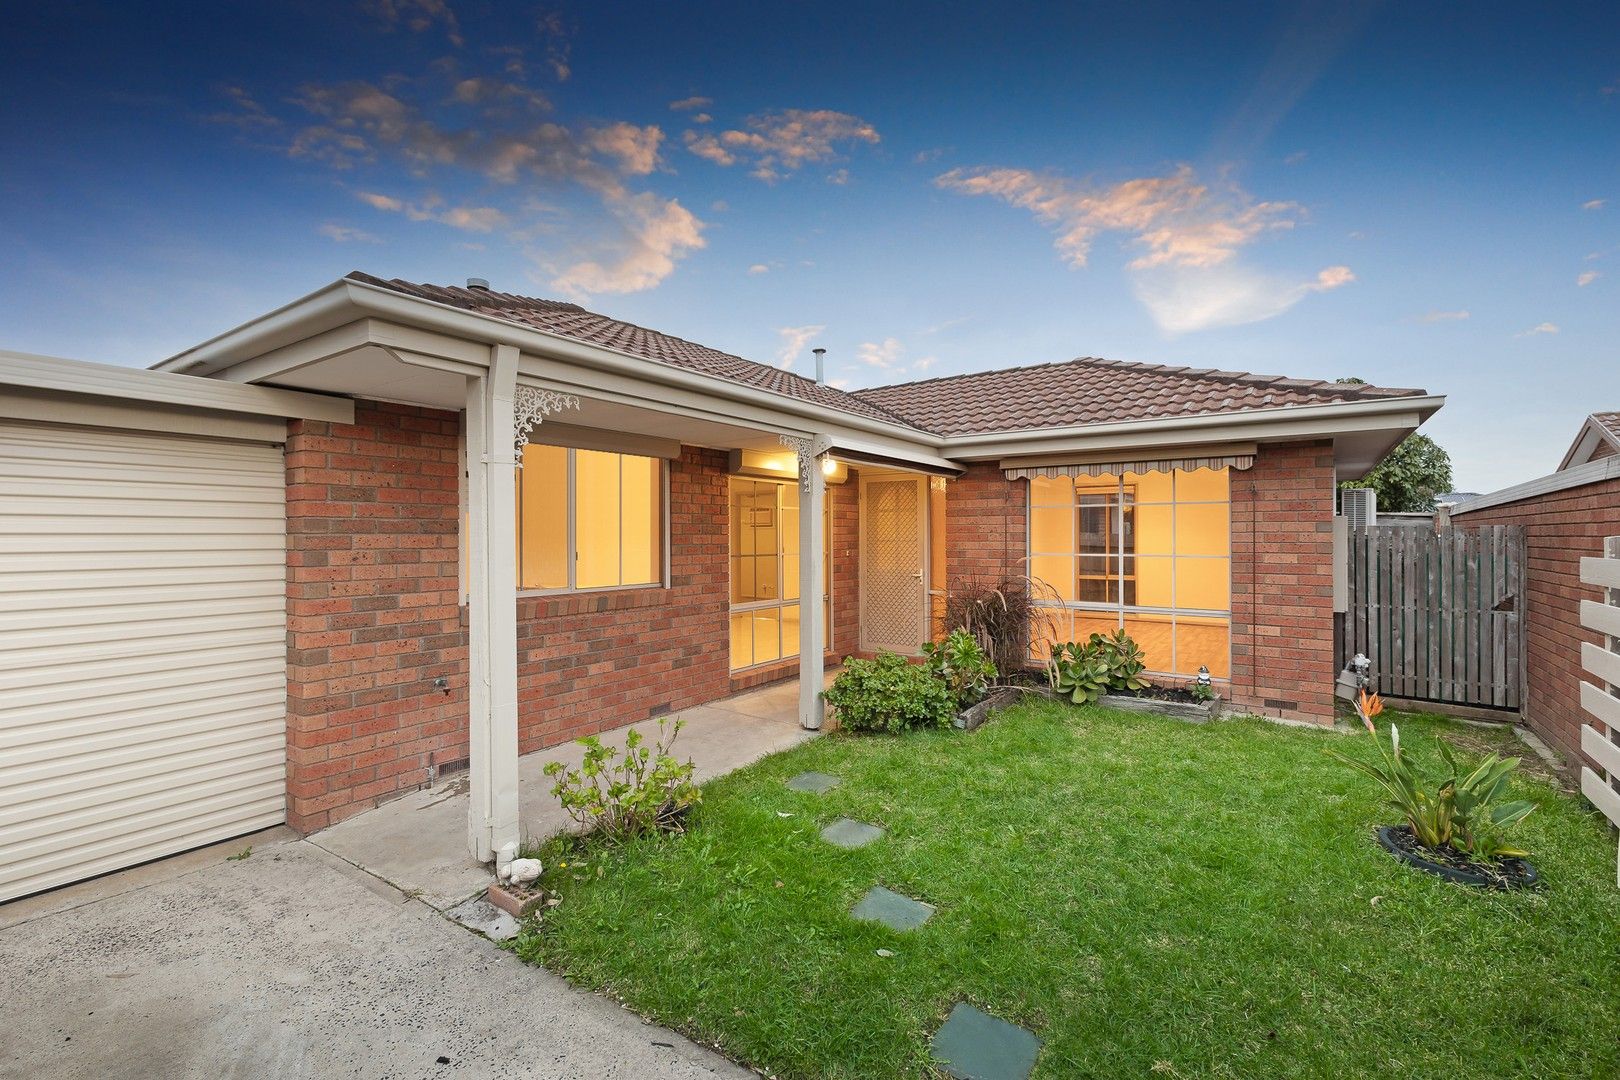 2 bedrooms House in 2/15 Parkview Close DANDENONG VIC, 3175